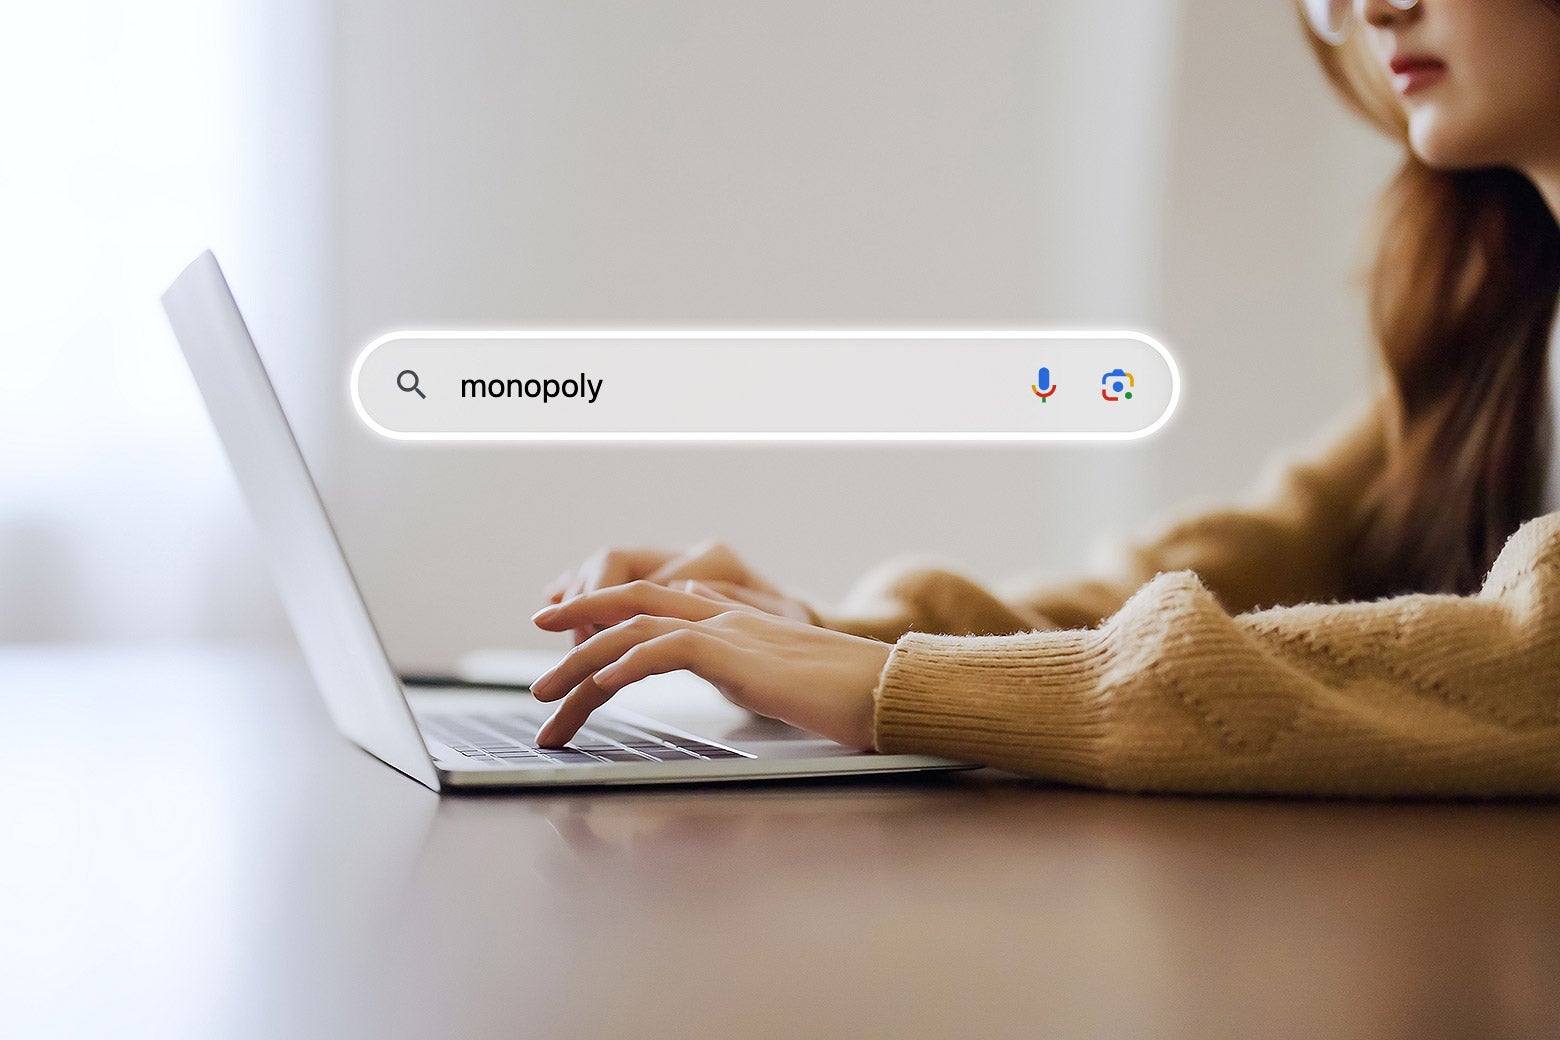 A woman typing the word "monopoly" into a Google search bar.